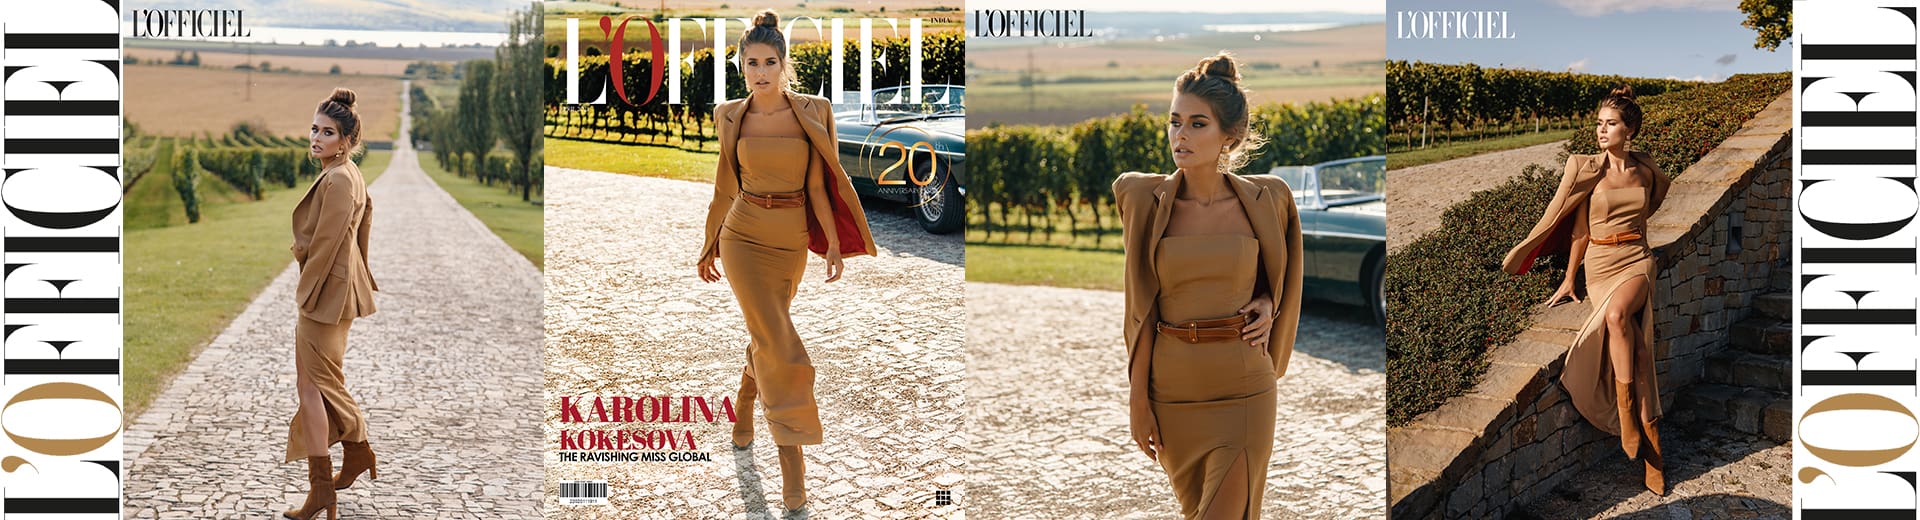 Fashion magazine cover spread featuring a woman in a chic beige outfit walking confidently on a cobblestone path with scenic vineyard and hills in the background.